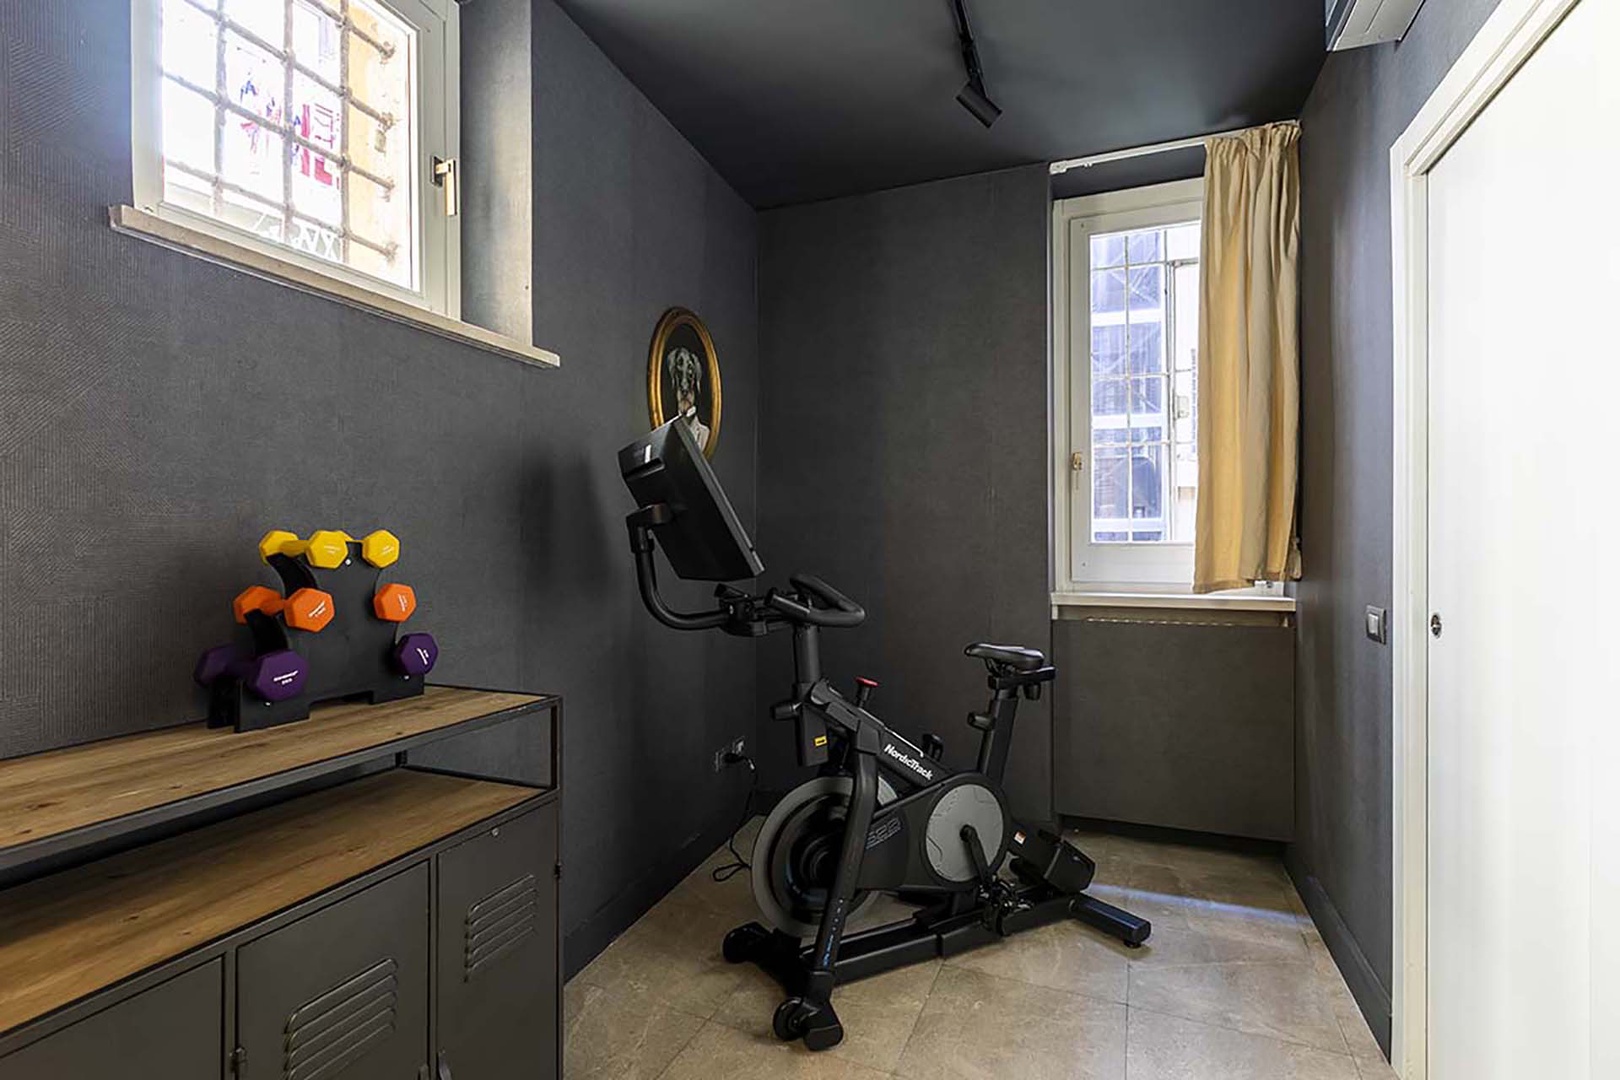 Small workout area